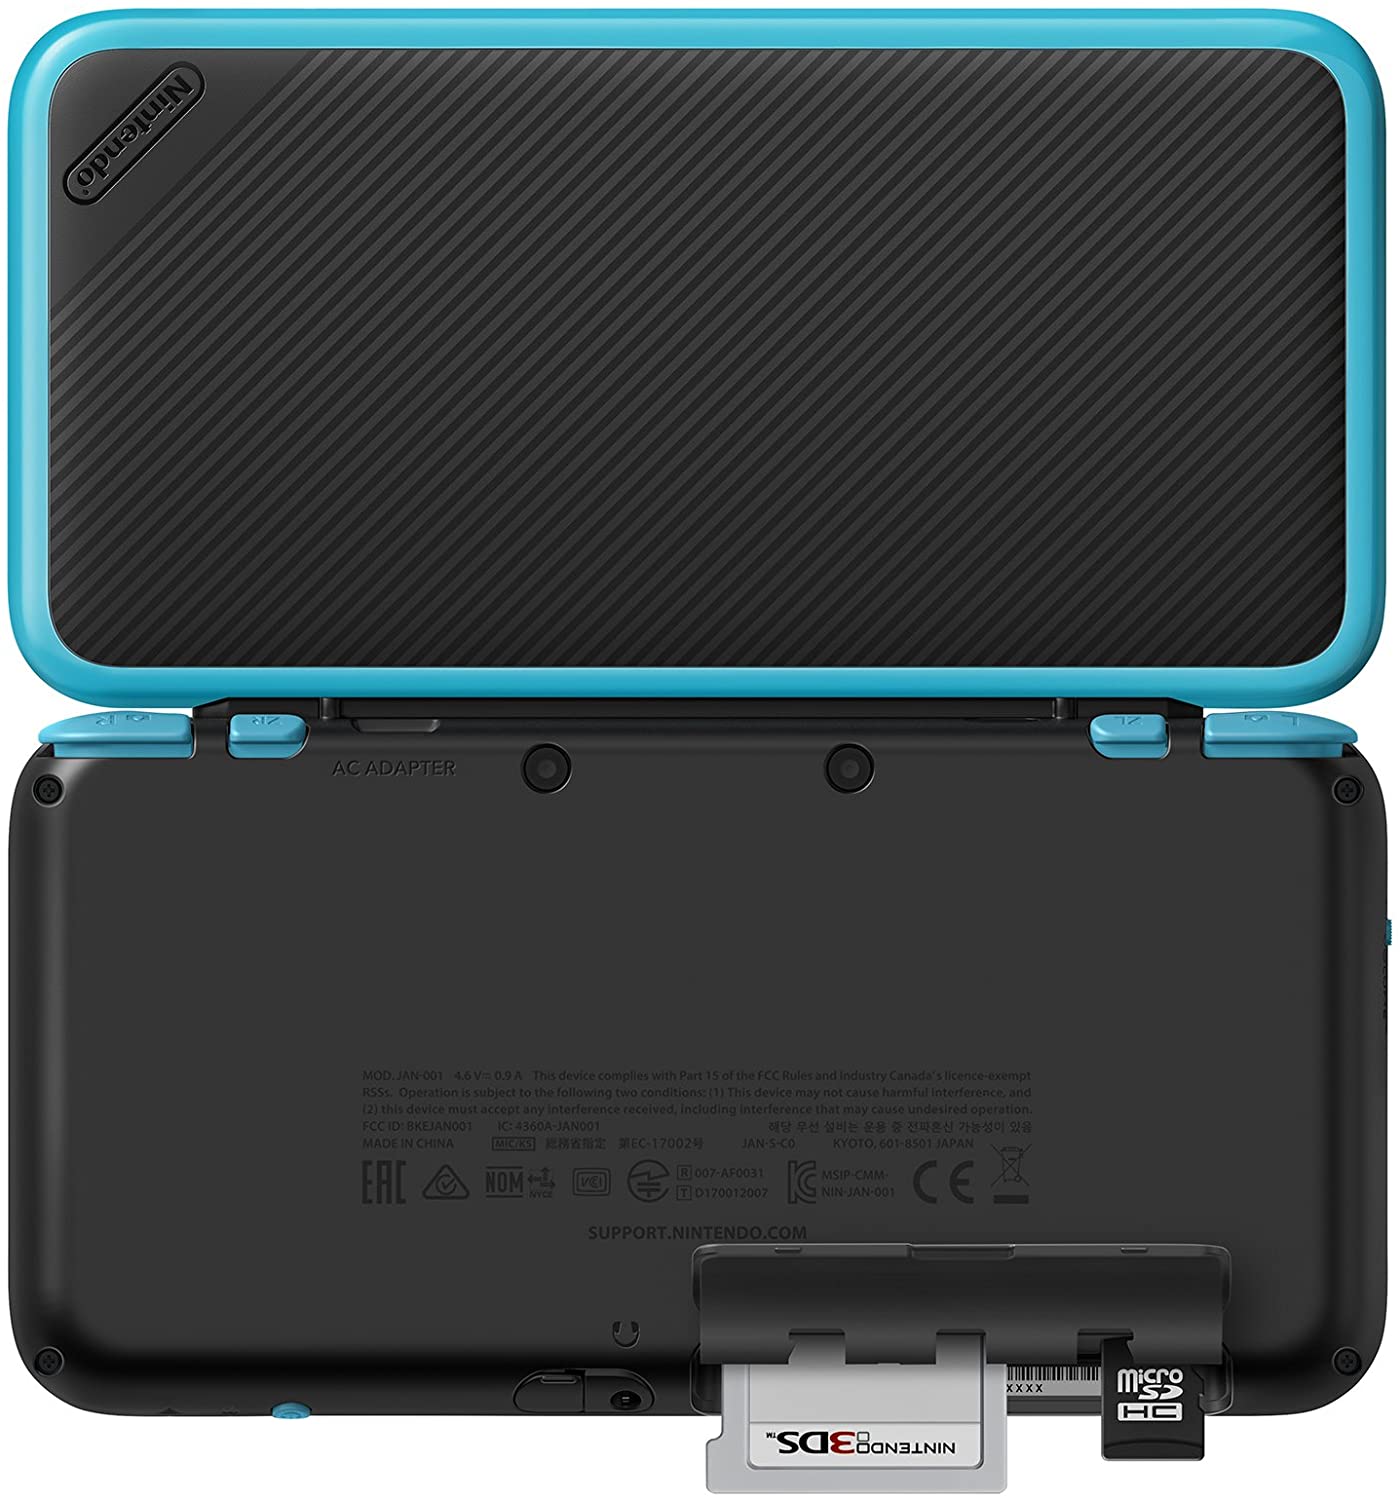 New Nintendo 2DS XL - Black + Turquoise - Nintendo 2DS King Gaming